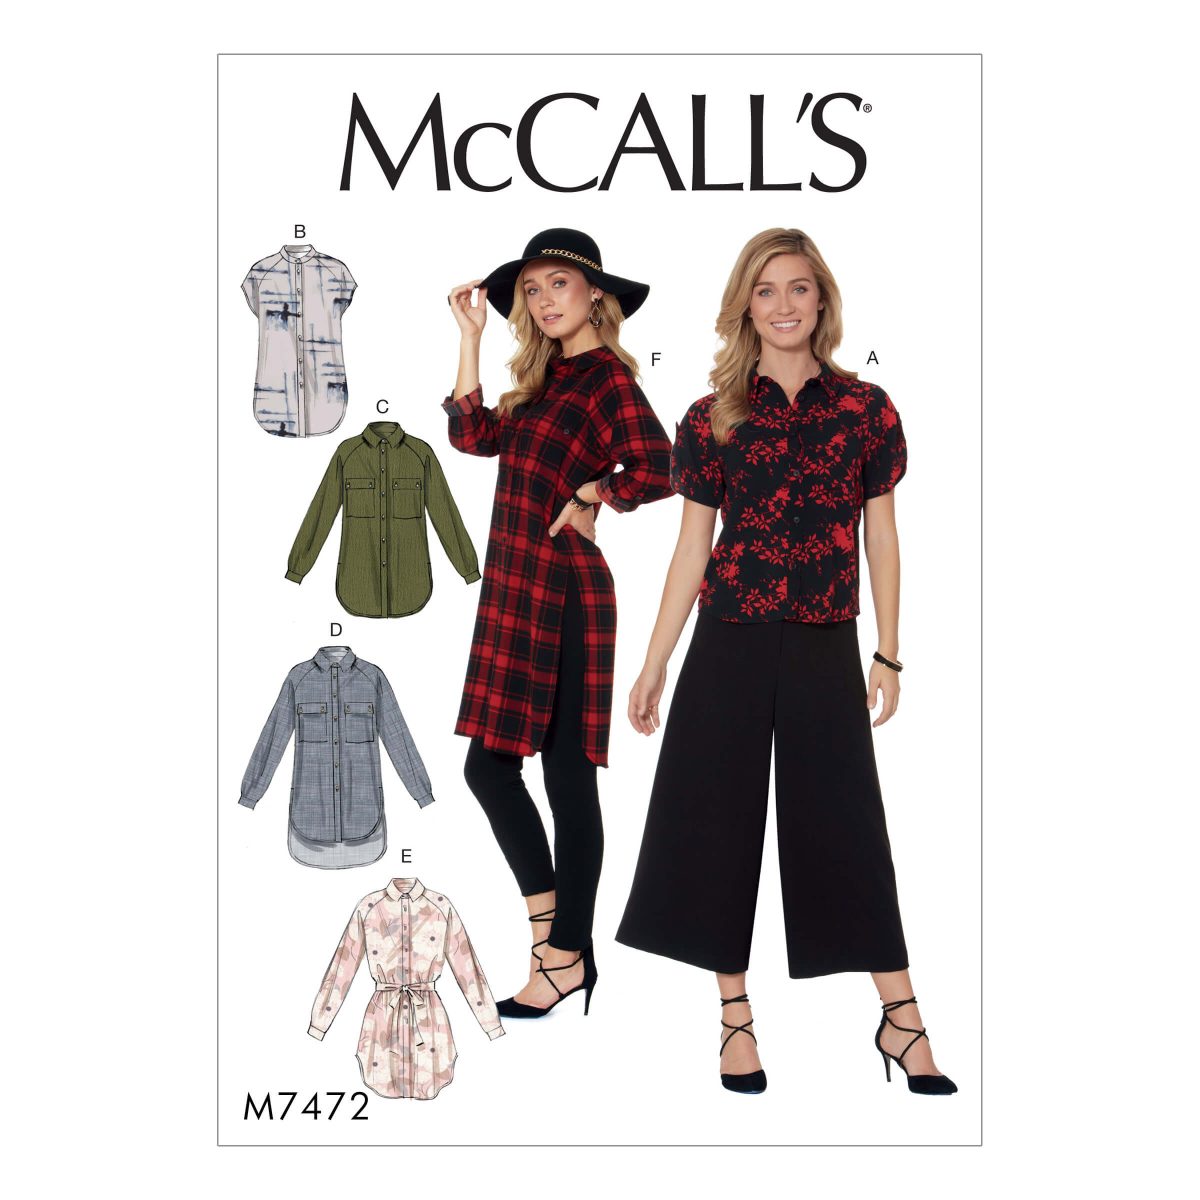 McCall's Sewing Pattern M7472 Misses' Raglan Sleeve, Button-Down Shirts and Tunics